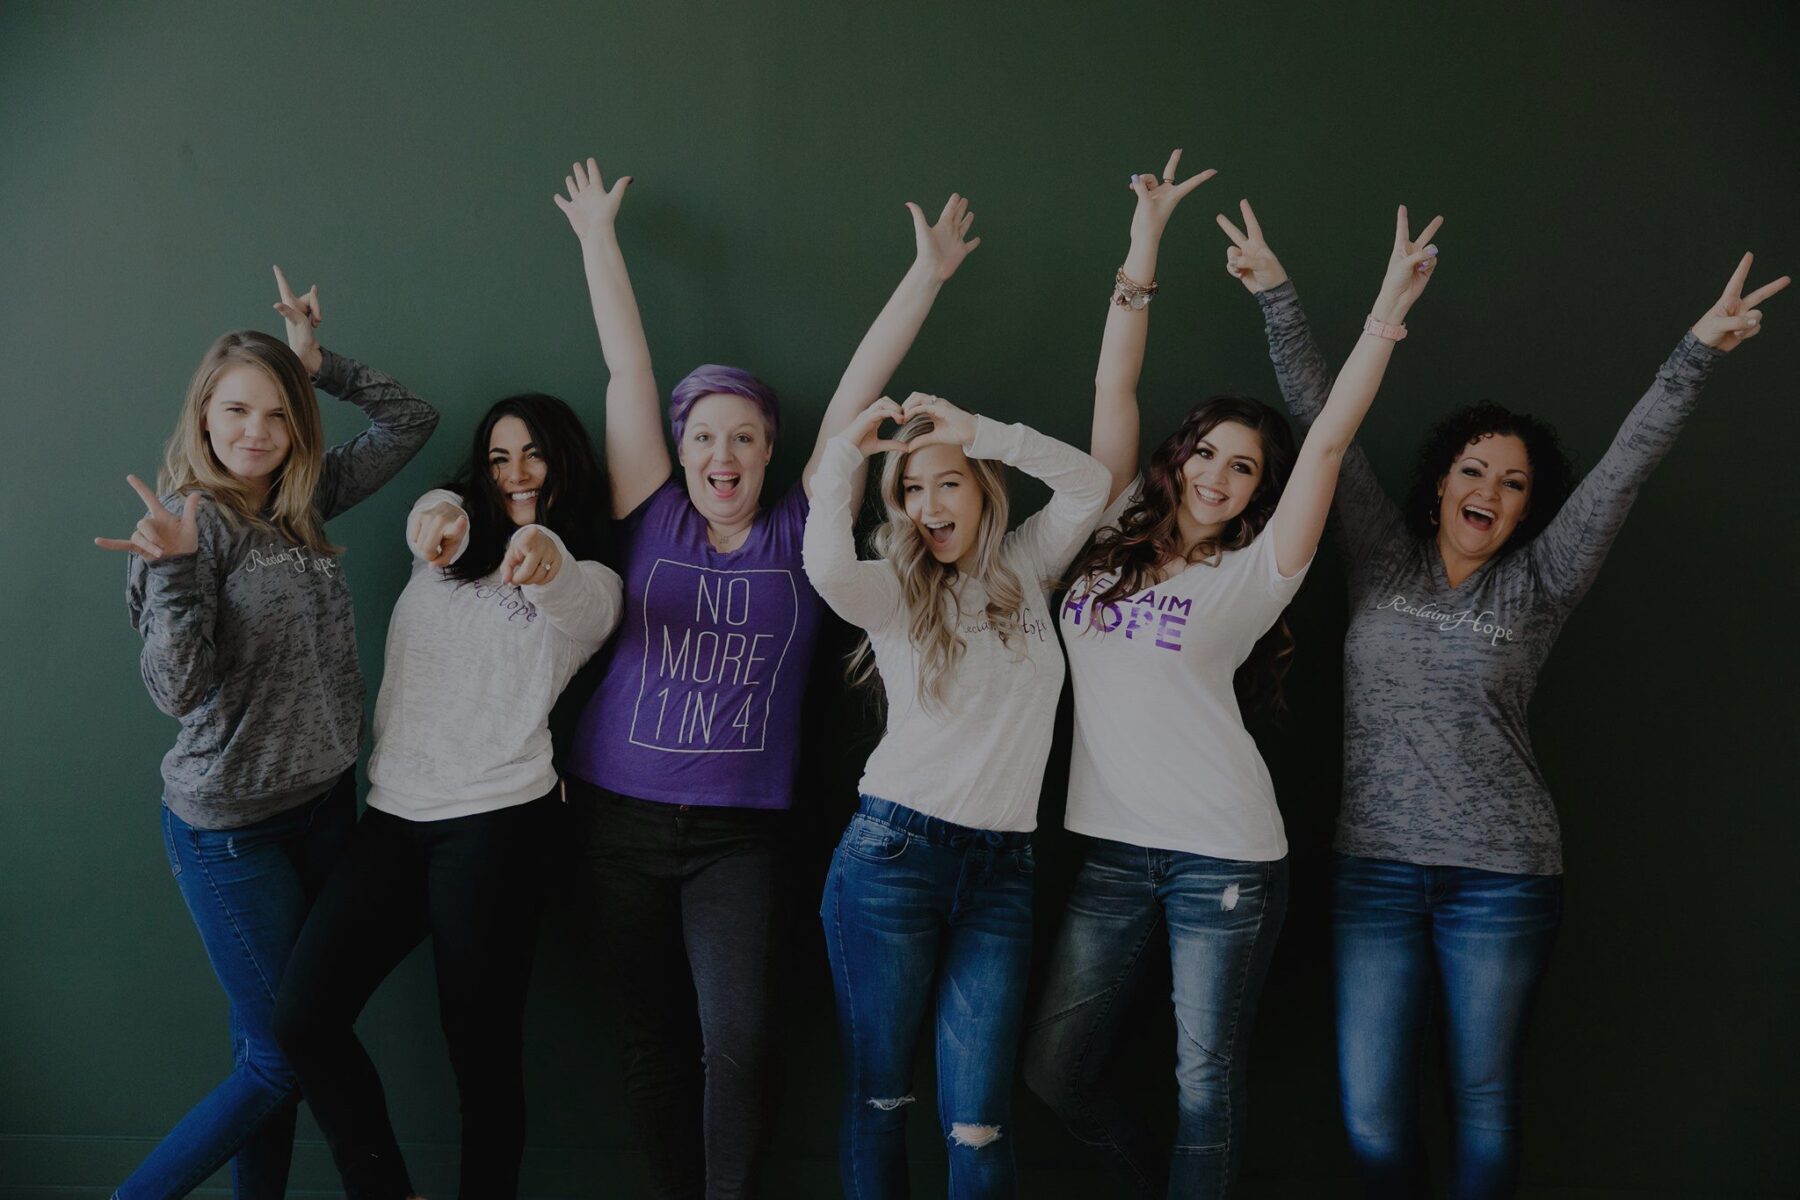 Group of six women posing joyfully in front of a green wall, some wearing shirts with positive messages.